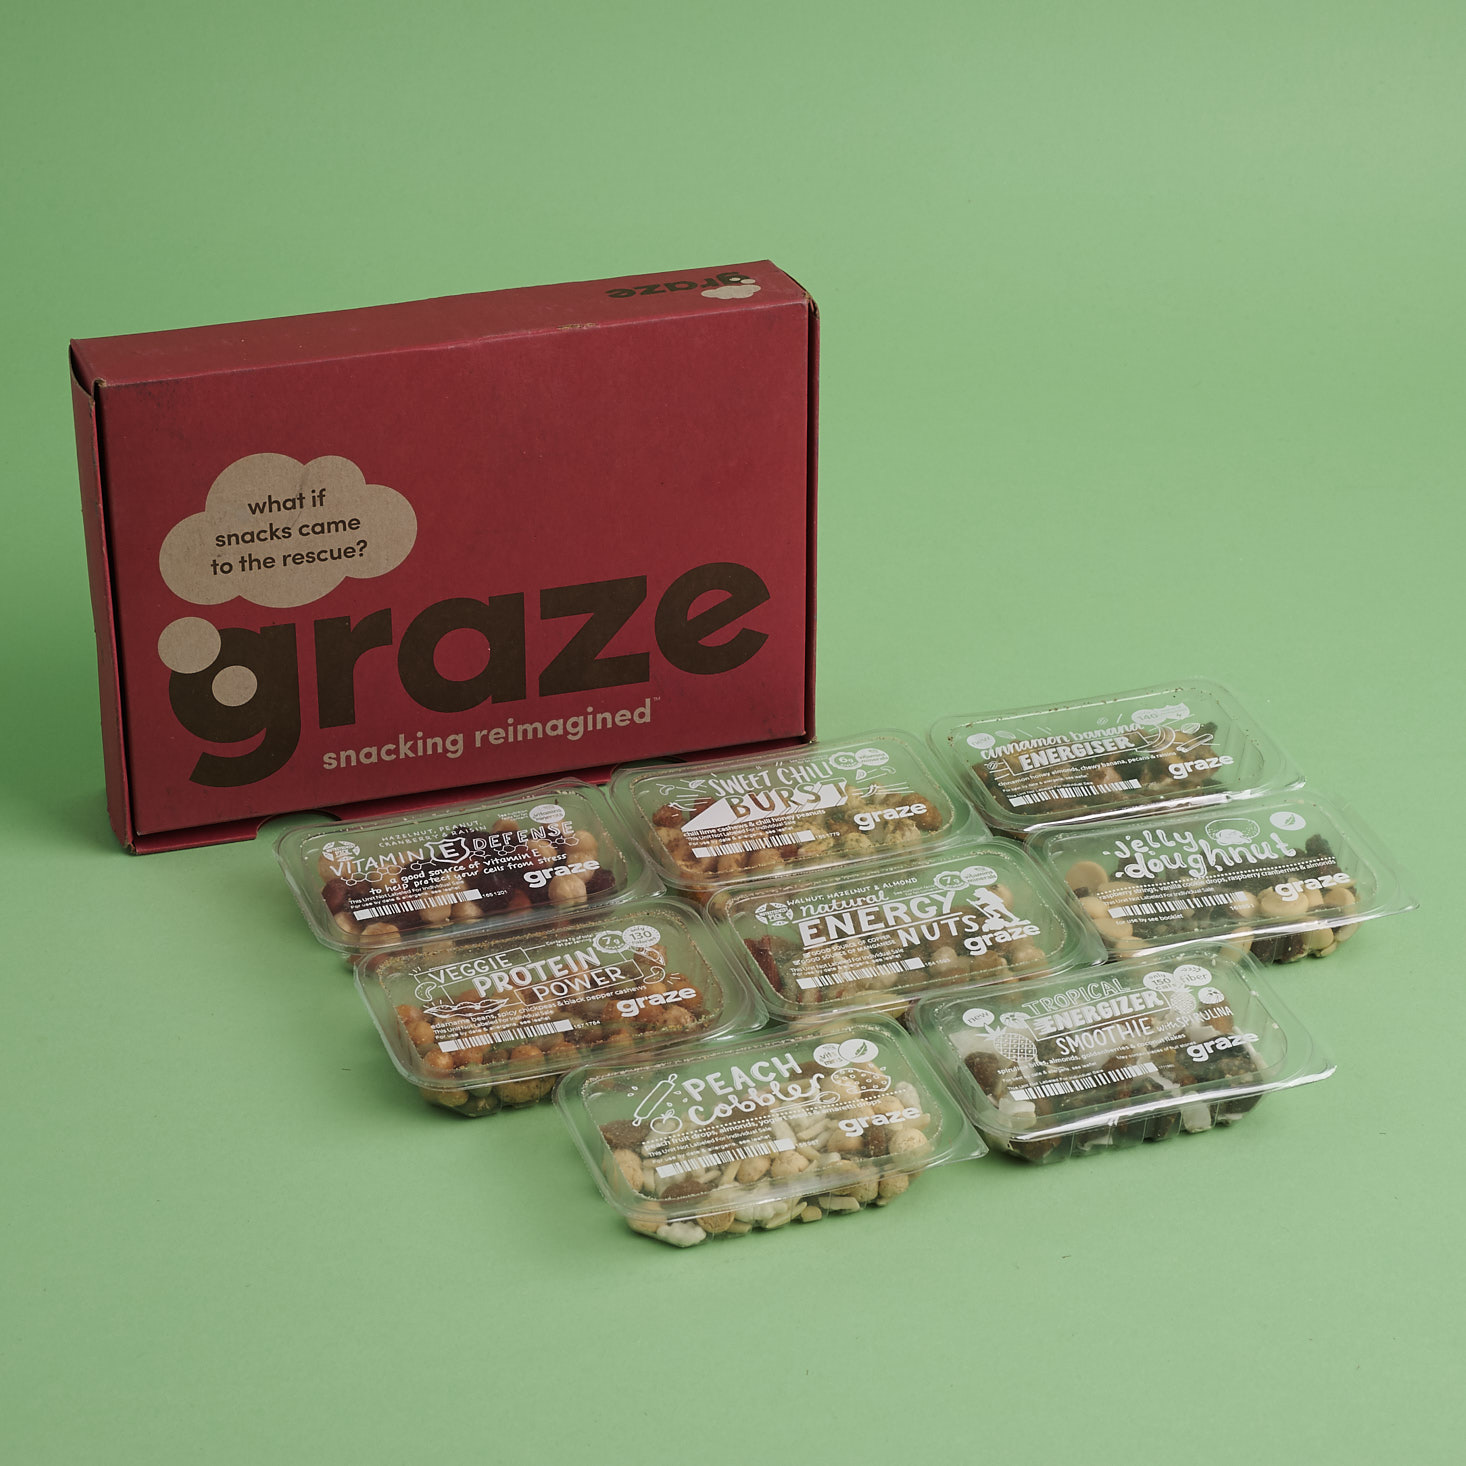 Graze 8 Snack Variety Box Review + Free Box Coupon – August 2018